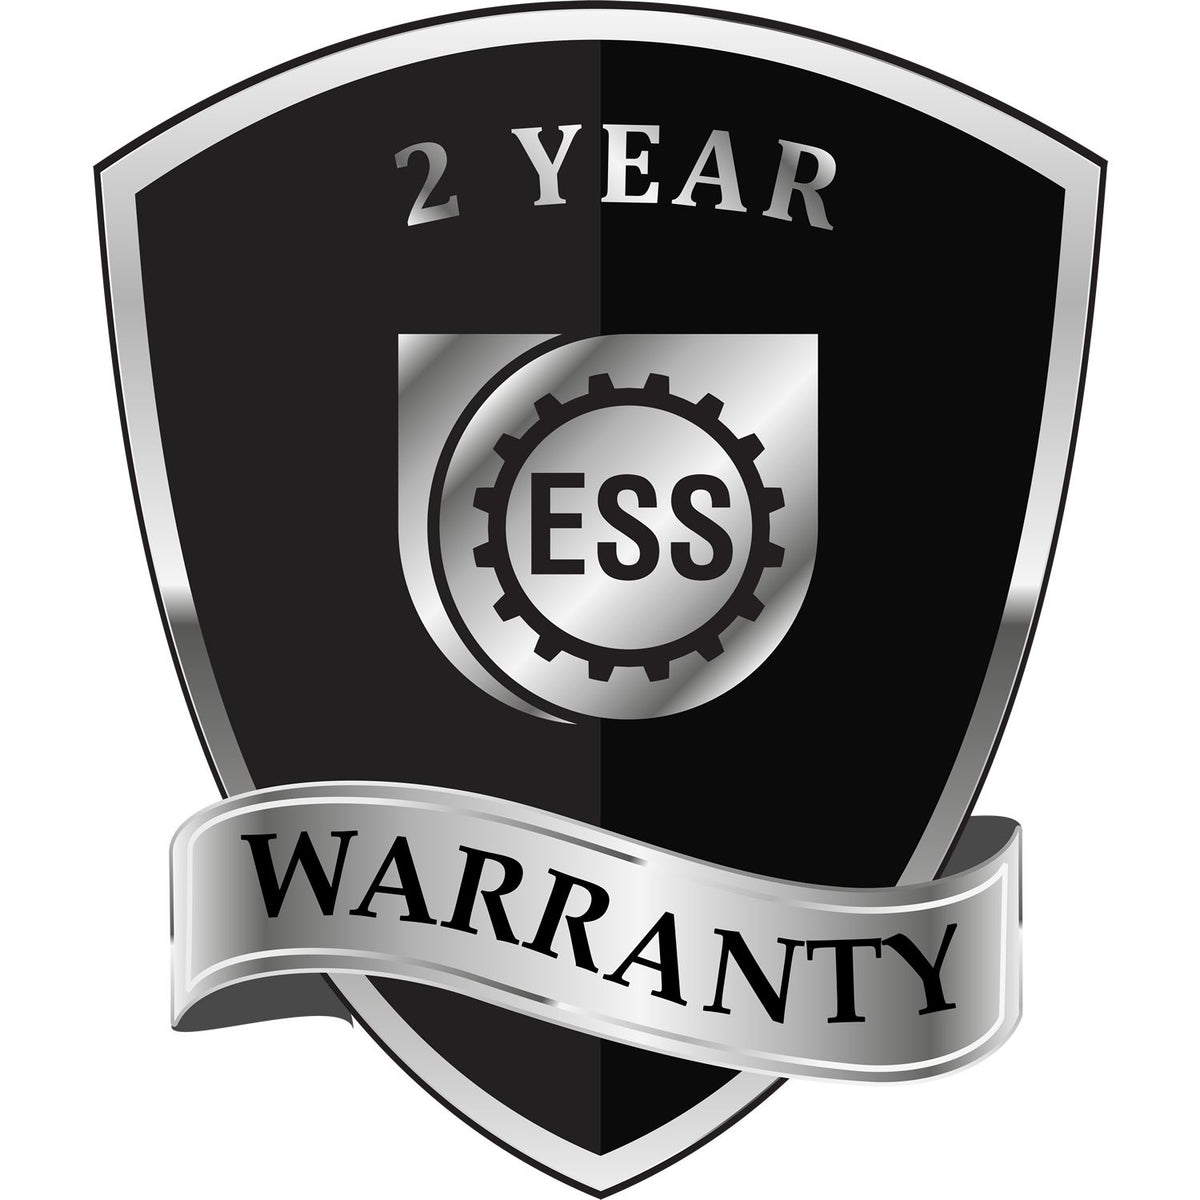 A badge or emblem showing a warranty icon for the State of Indiana Extended Long Reach Engineer Seal